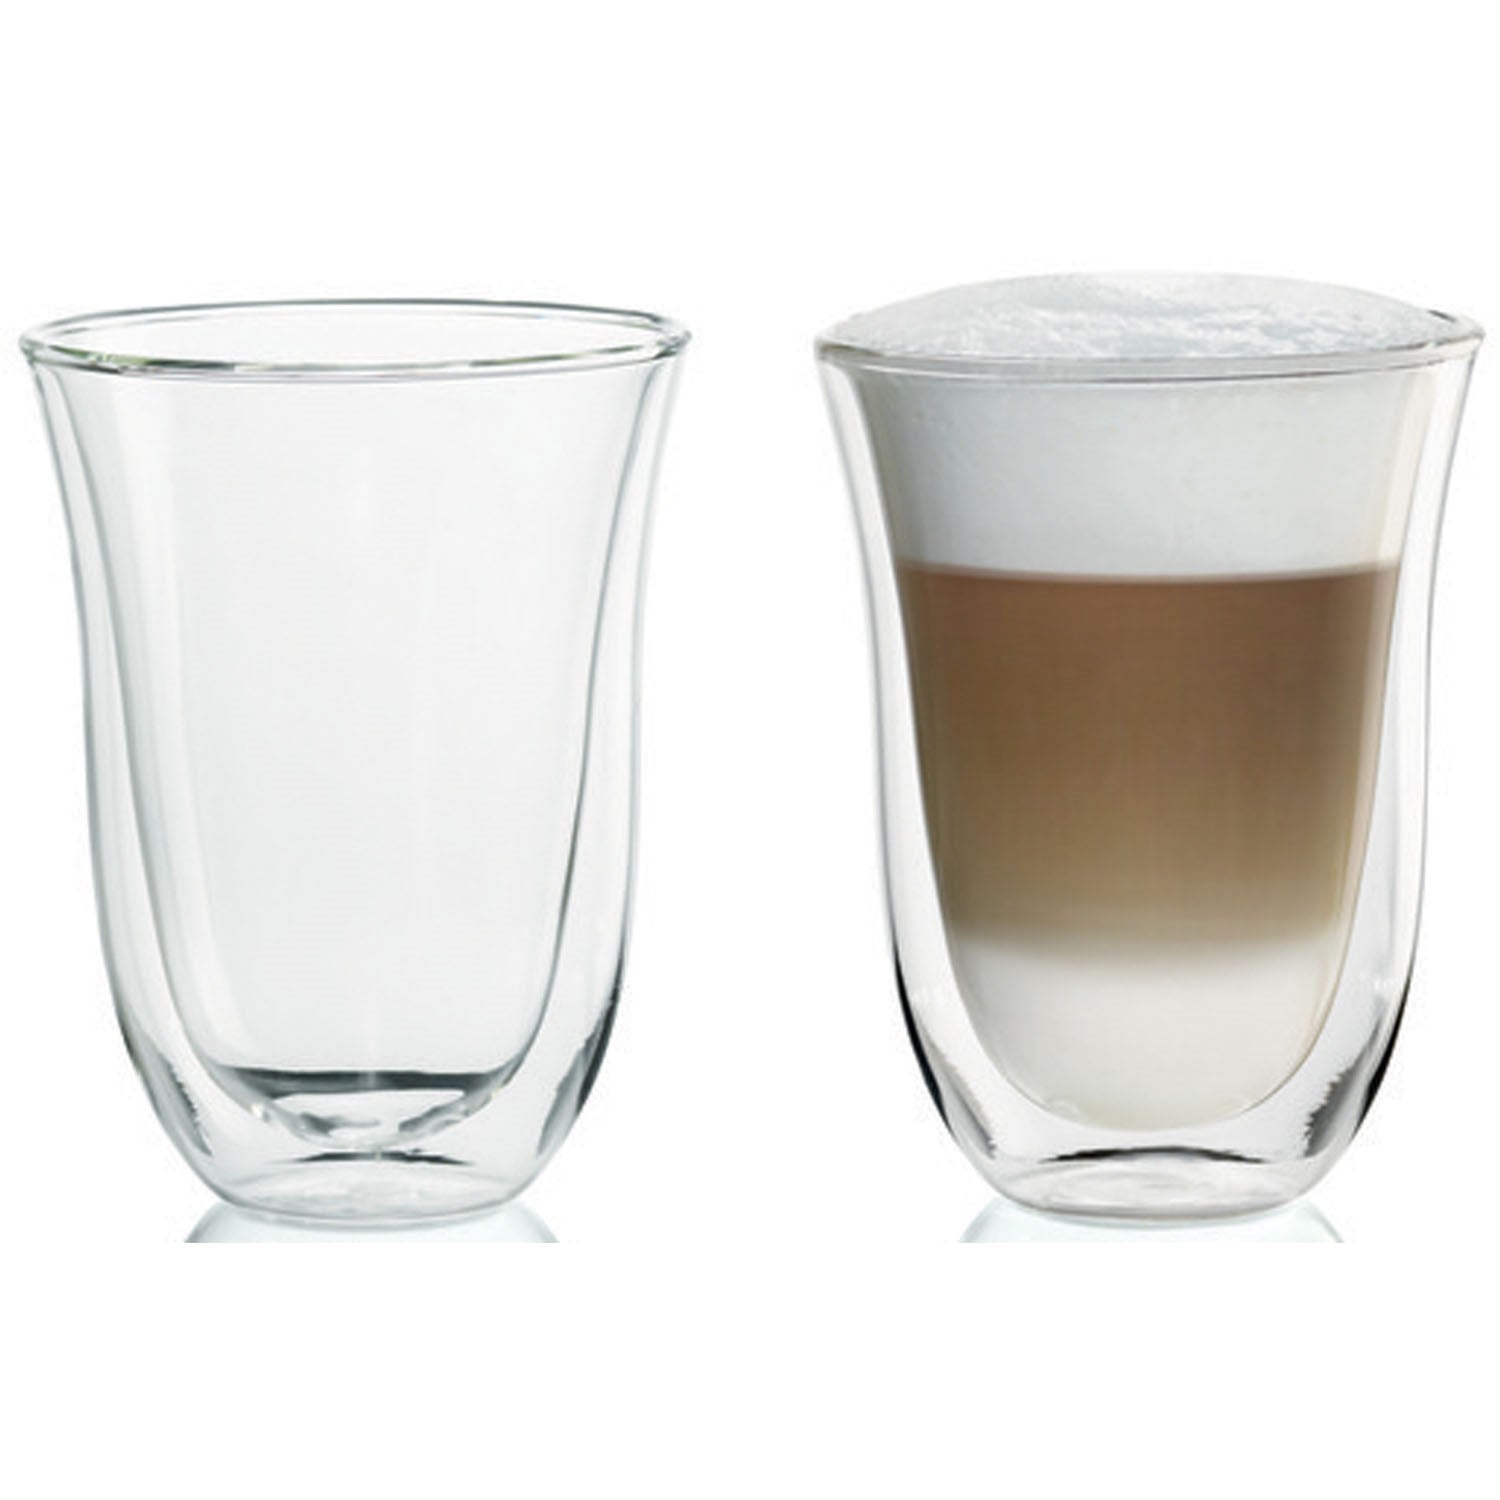 Buy DELONGHI DLSC312 Double Wall Latte Glasses - Pack of 2